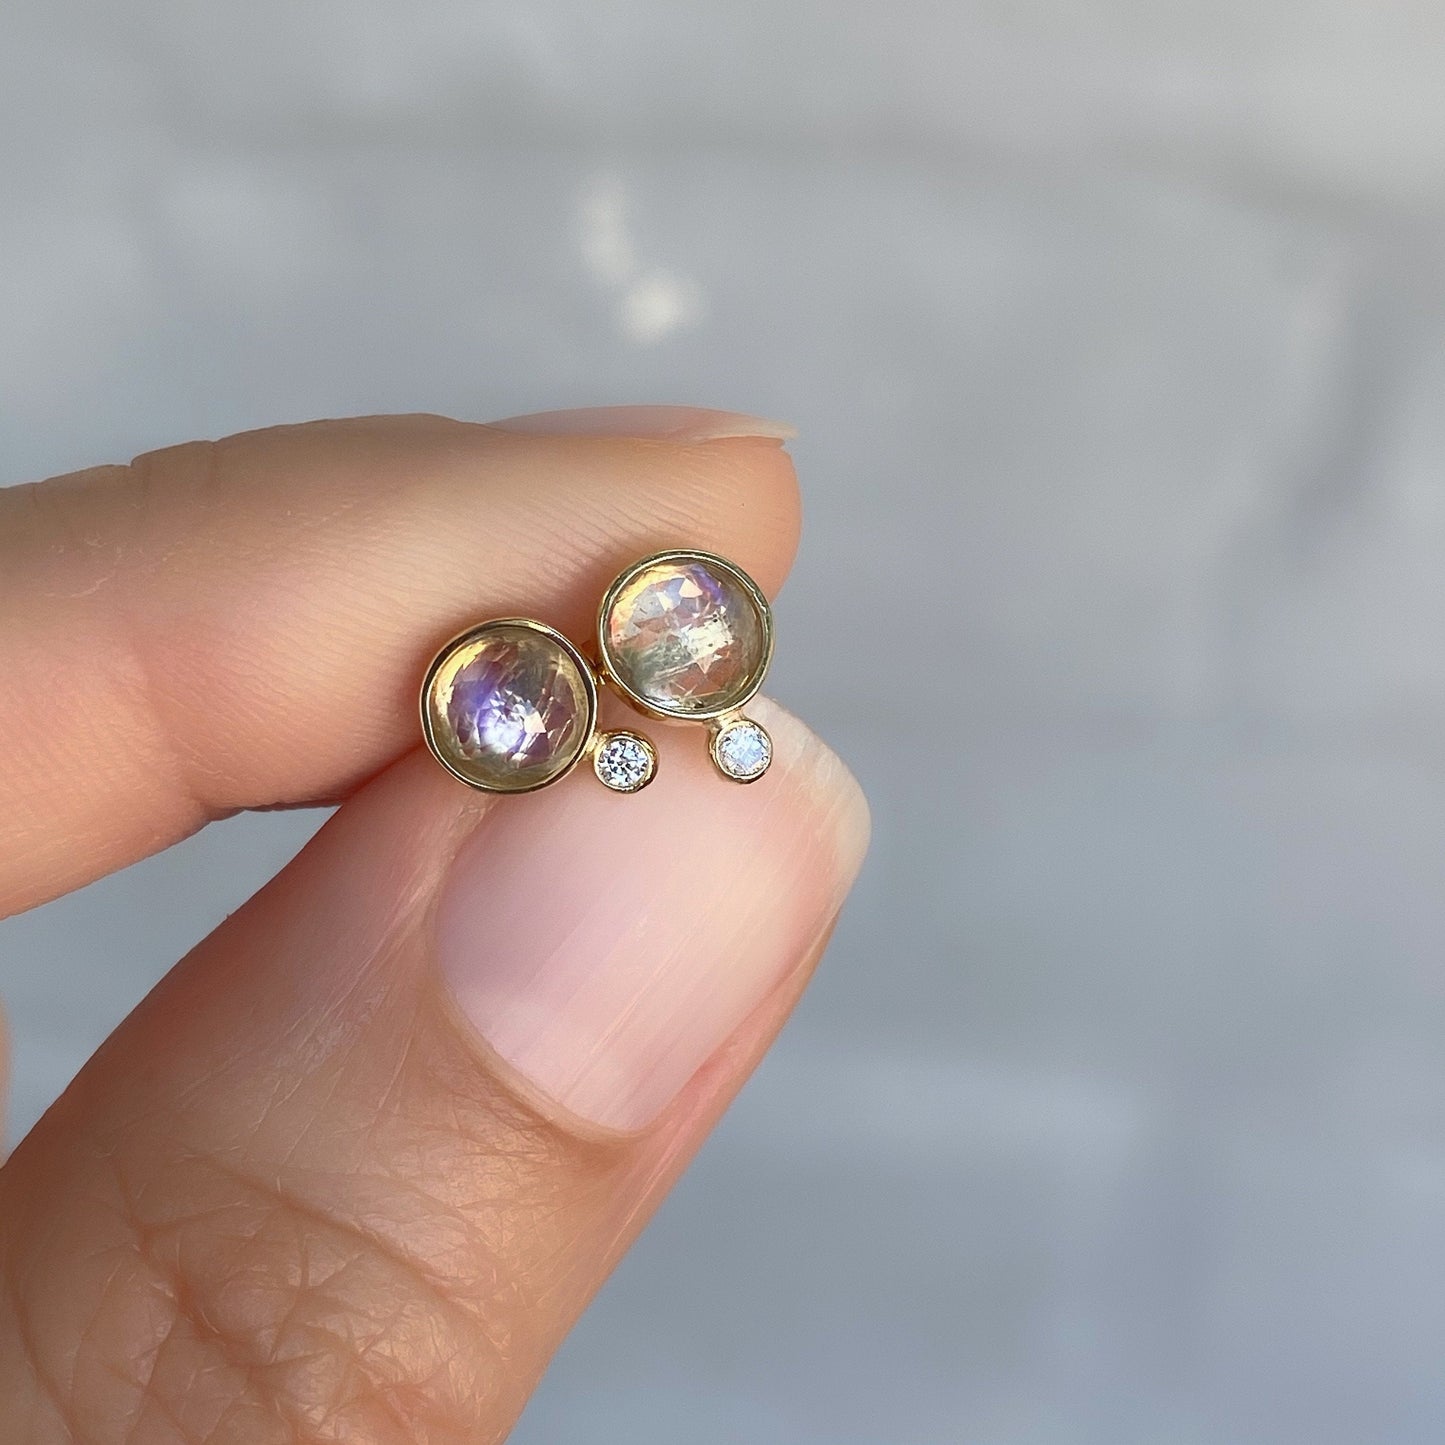 moonbeam moonstone diamond stud earrings in yellow gold in hand for scale